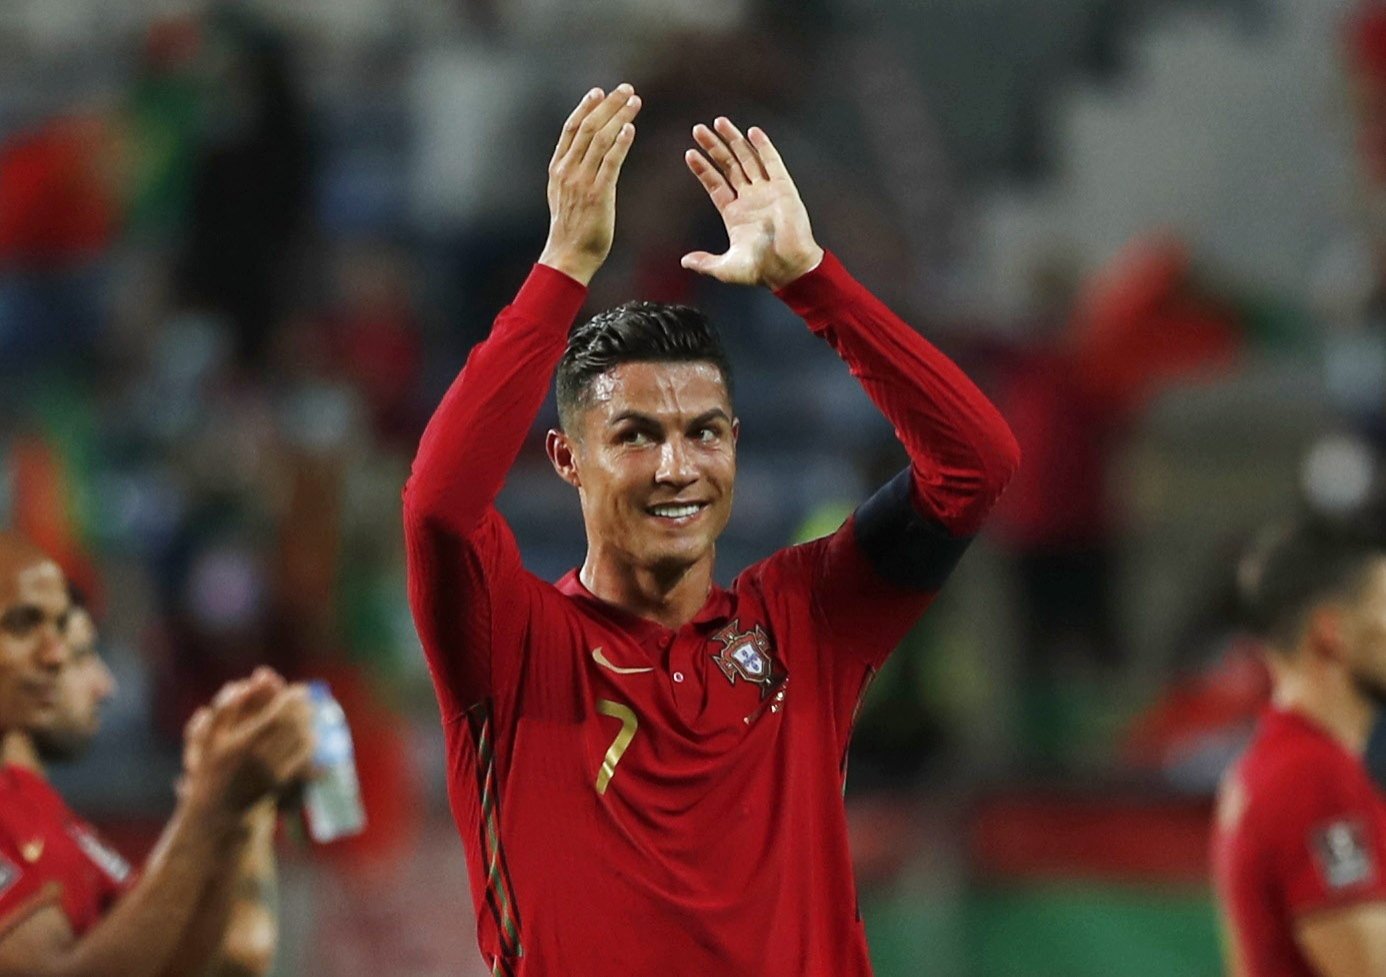 Portugal's Cristiano Ronaldo celebrates scoring their first goal during the World Cup qualifier match against Ireland, Almancil, Portugal, Sept. 1, 2021. (Reuters Photo)